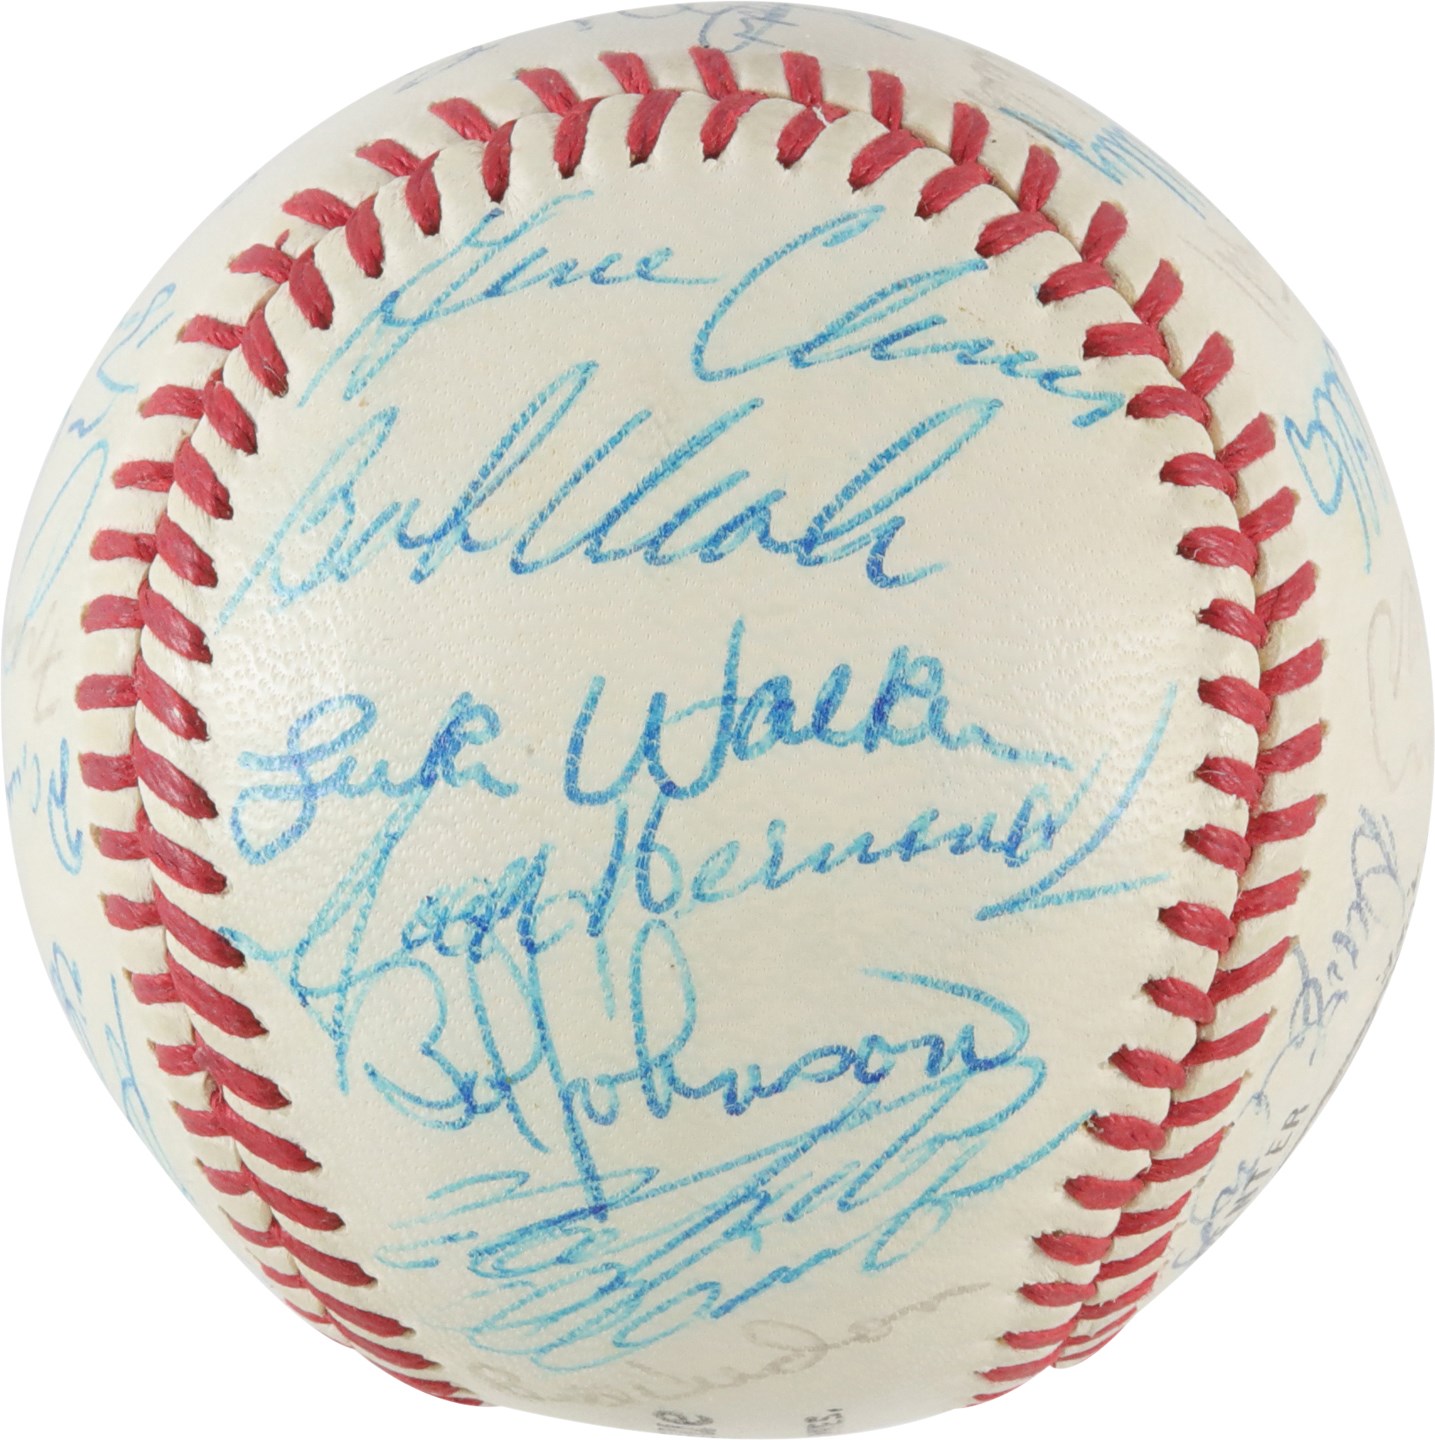 Clemente and Pittsburgh Pirates - 1971 World Champion Pittsburgh Pirates Team-Signed Baseball w/Roberto Clemente (PSA)